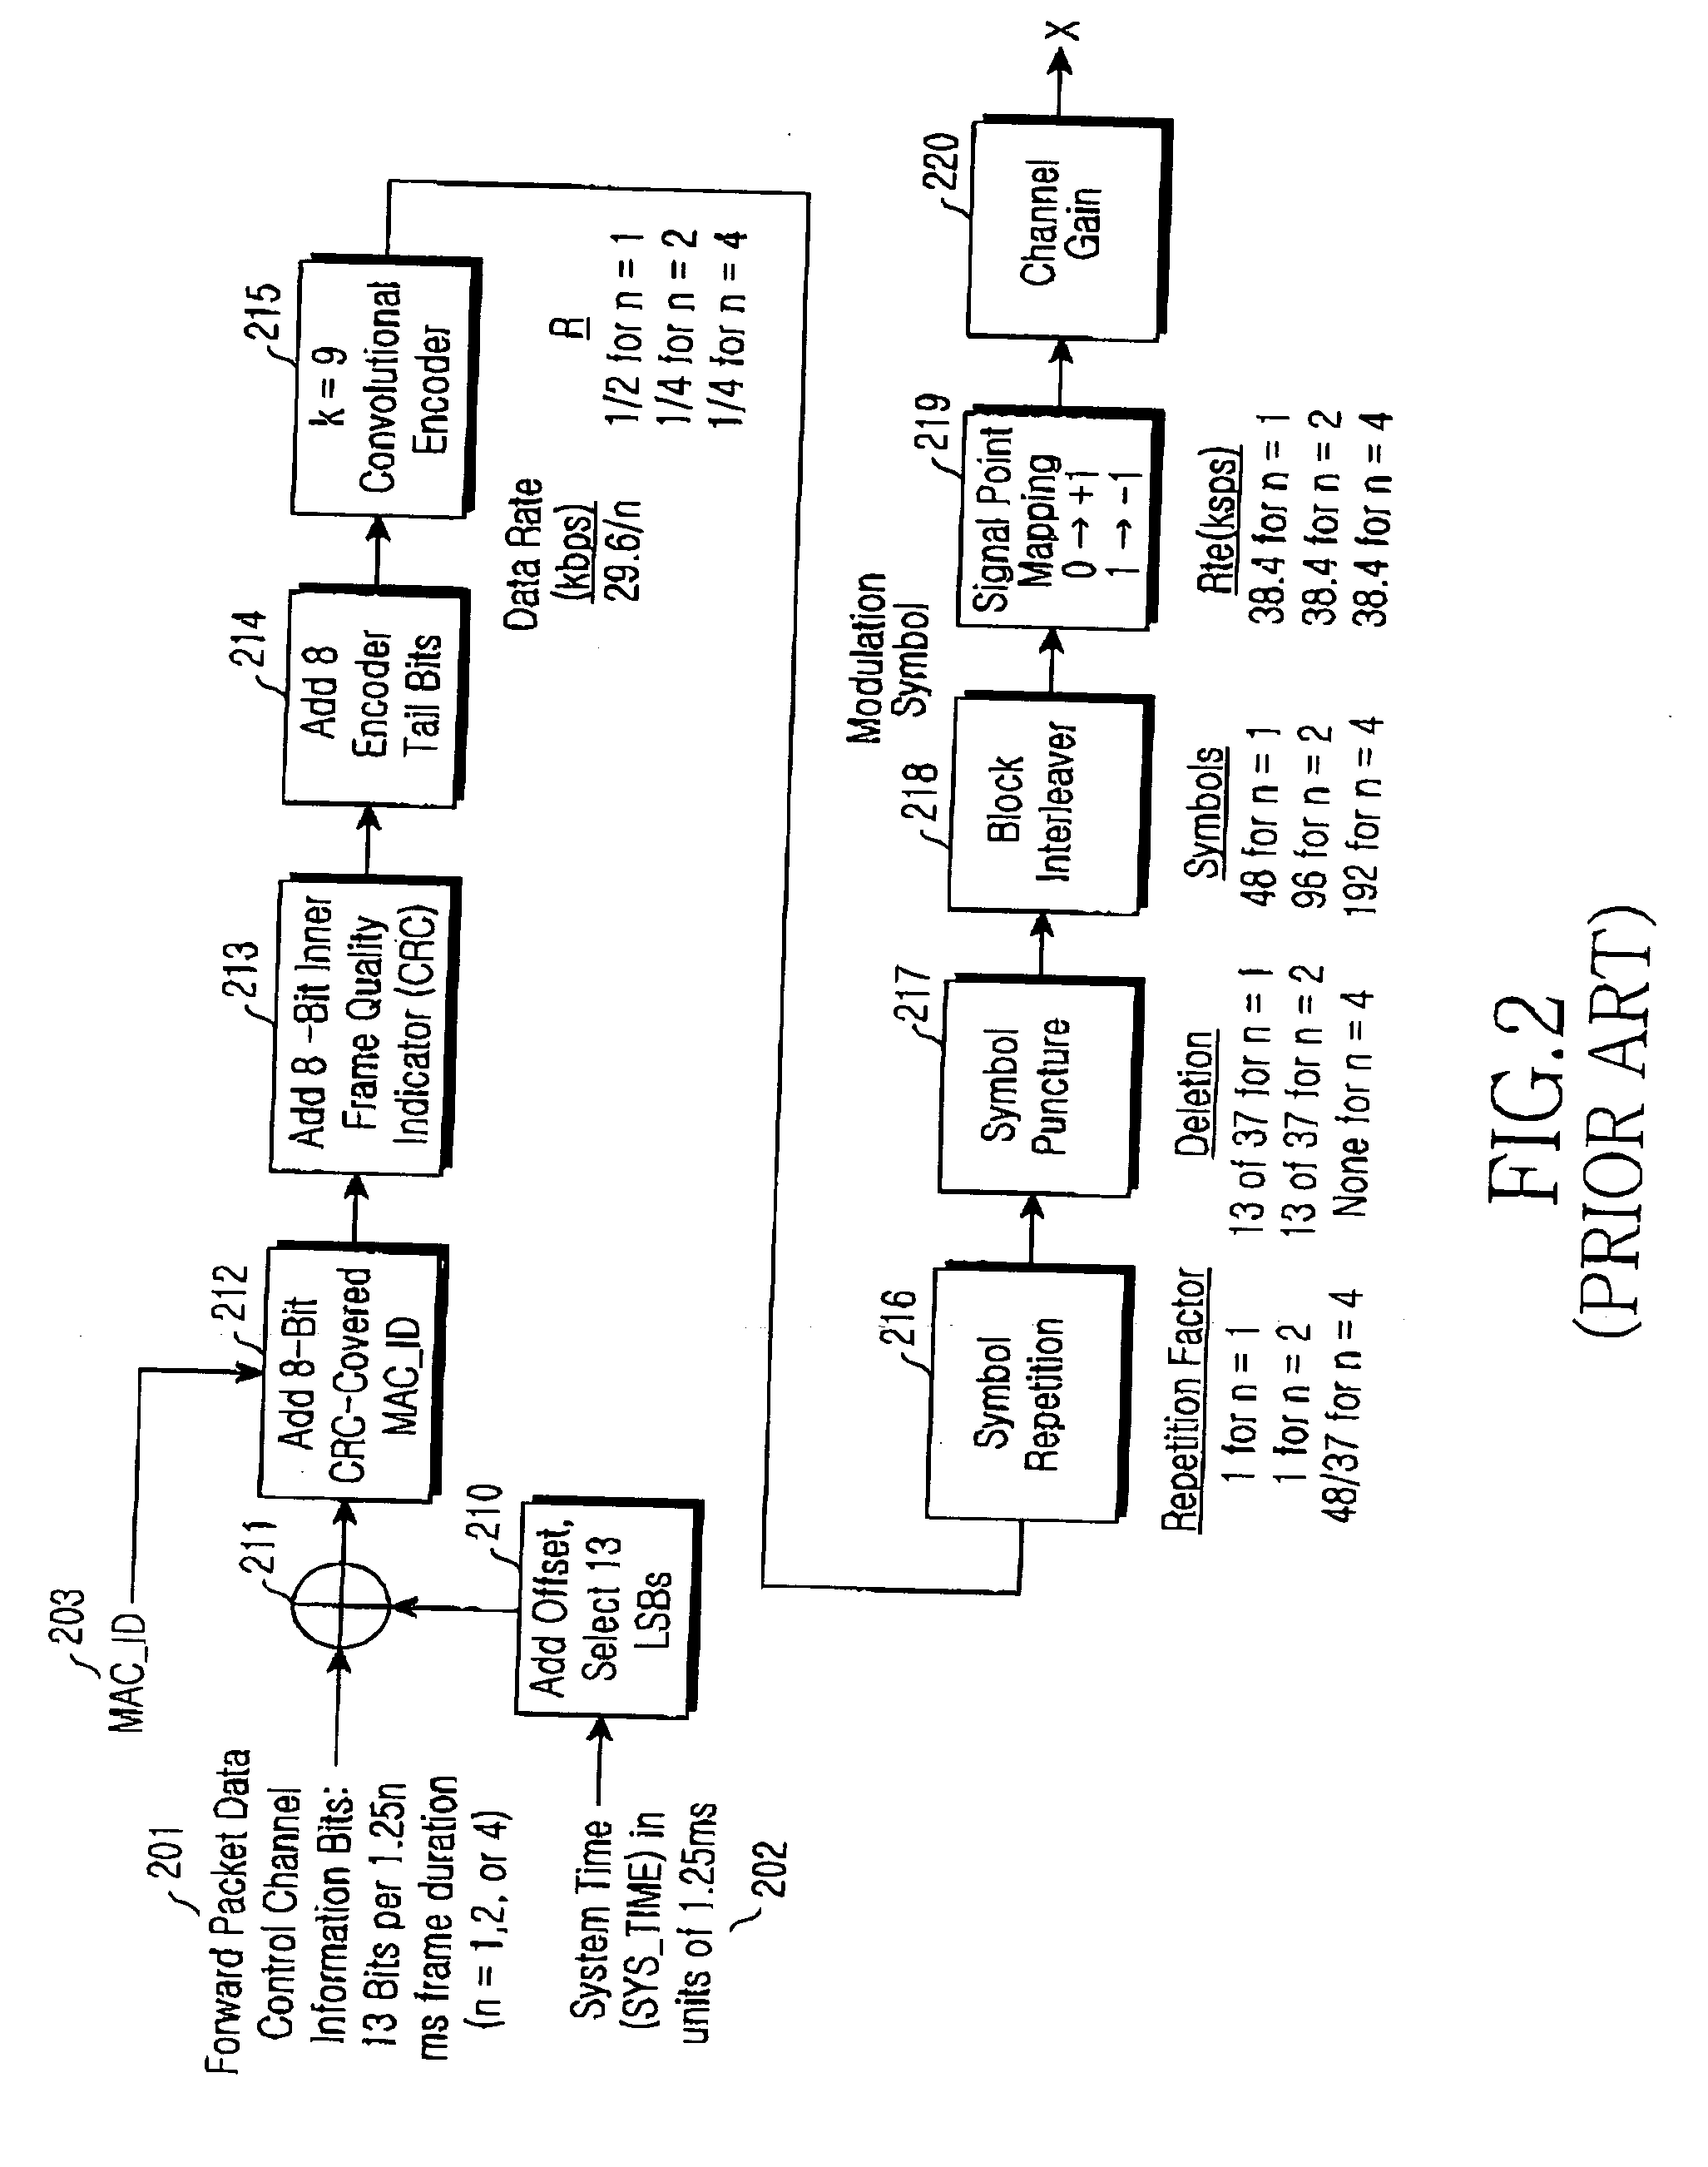 Apparatus and method for transmitting a control message on a packet data control channel in a mobile communication system supporting a packet data service